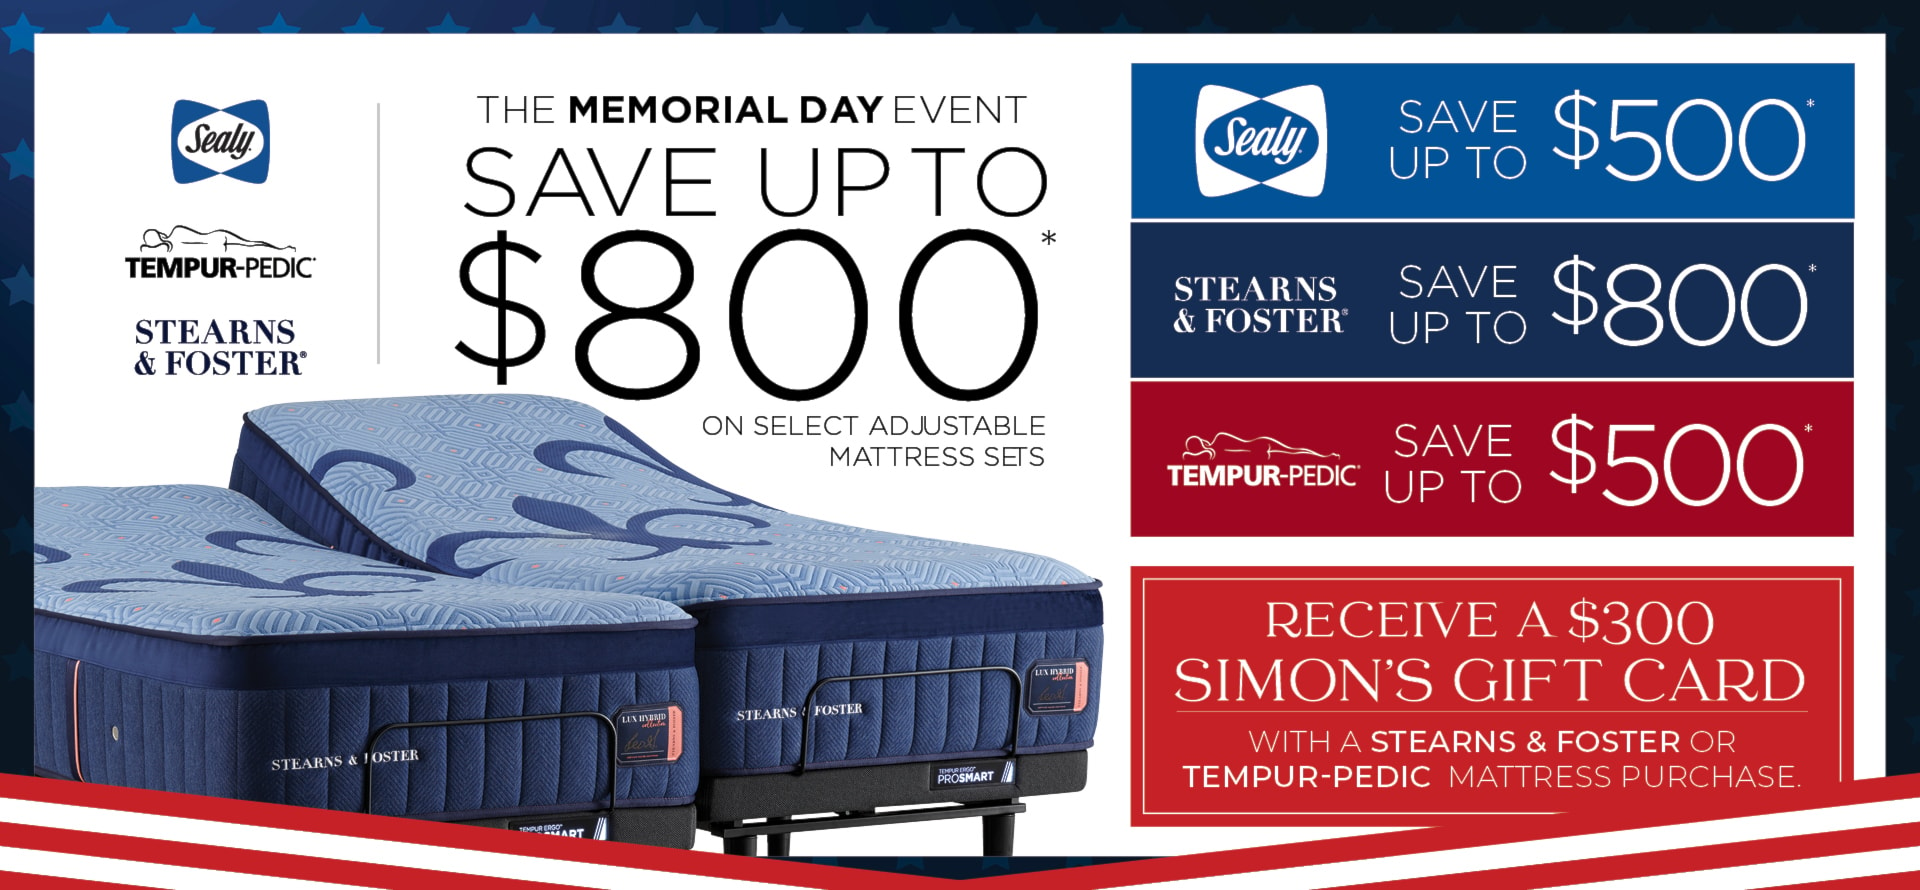 Simon's memorial day mattress sale is going on now. Save up to $800 on adjustable mattress sets; $500 on sealy, $500 on Stearns and Foster $